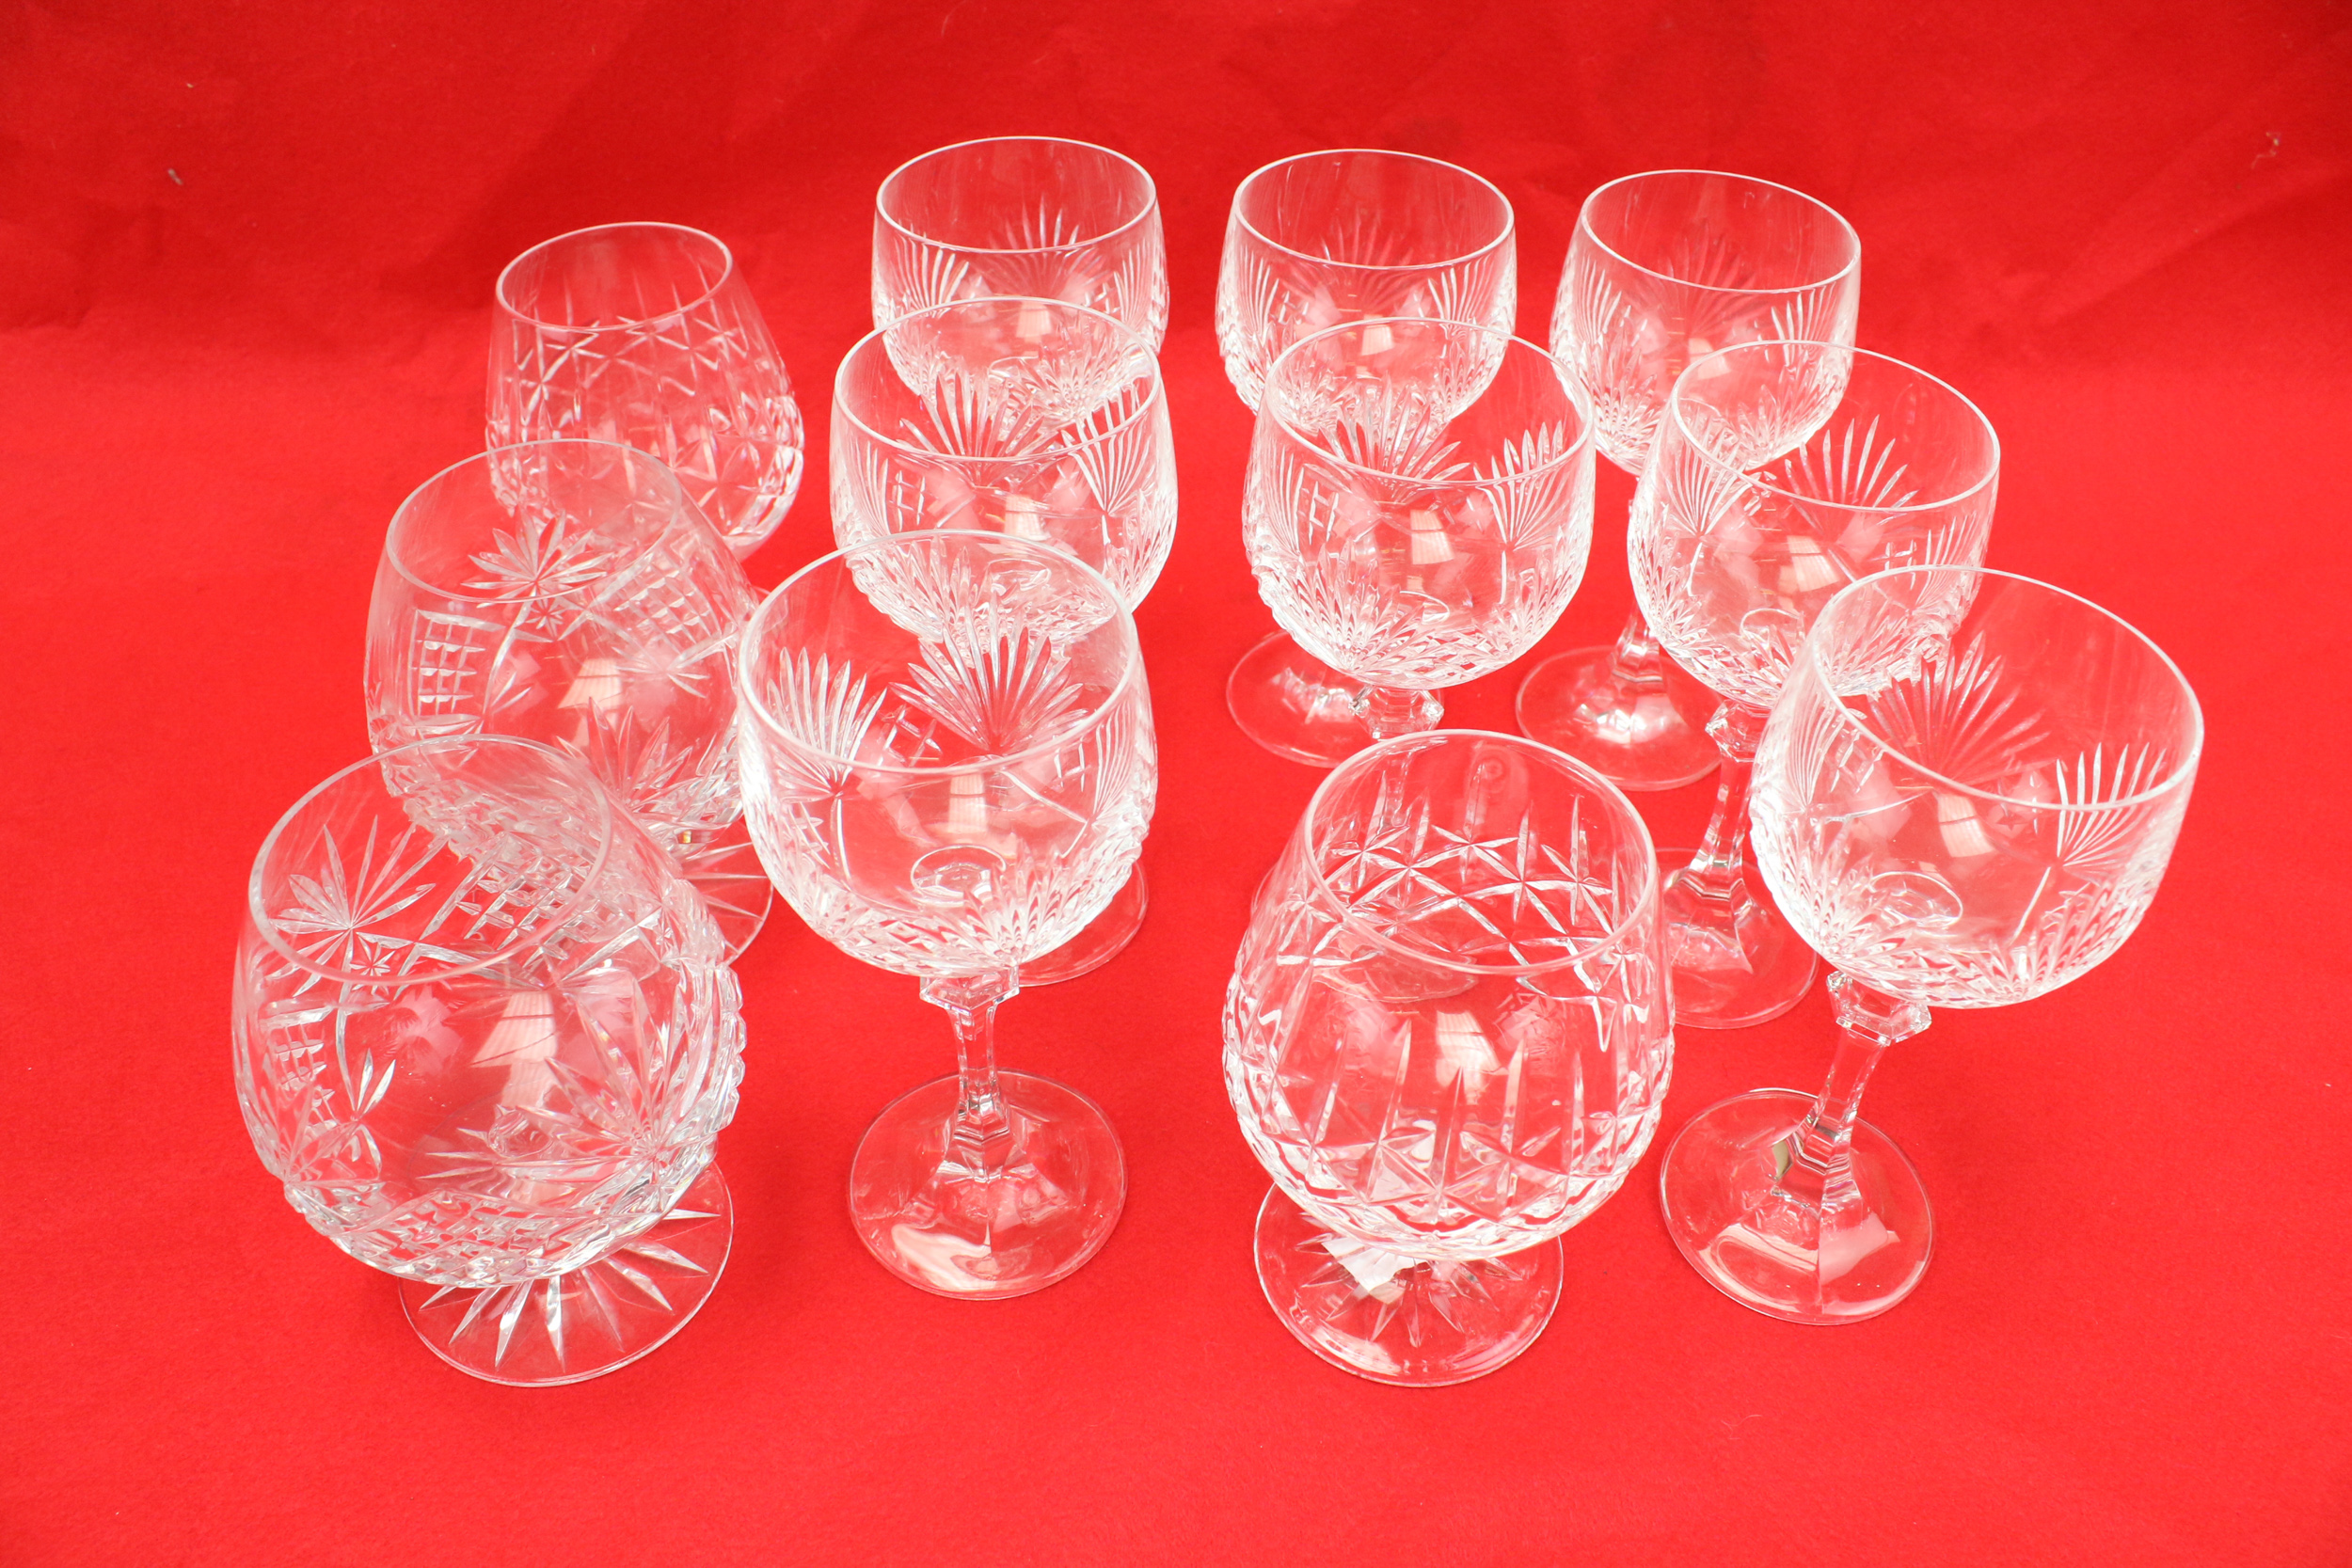 A collection of cut glass drinking glasses.